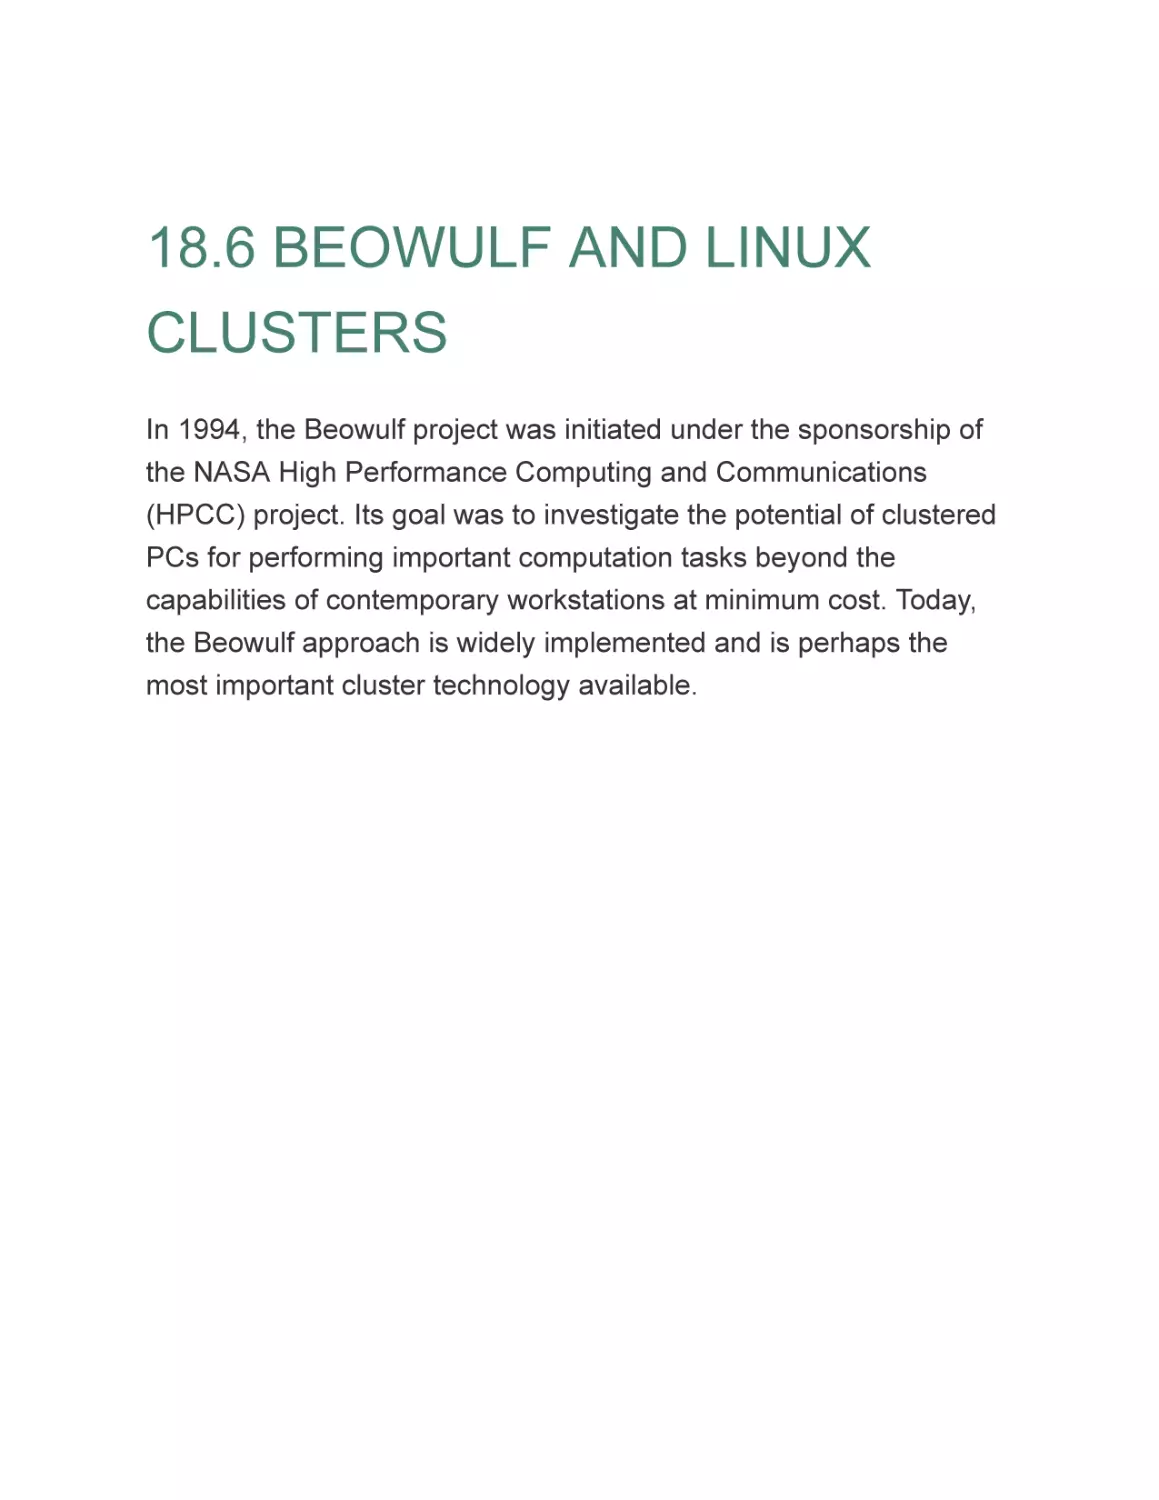 18.6 BEOWULF AND LINUX CLUSTERS